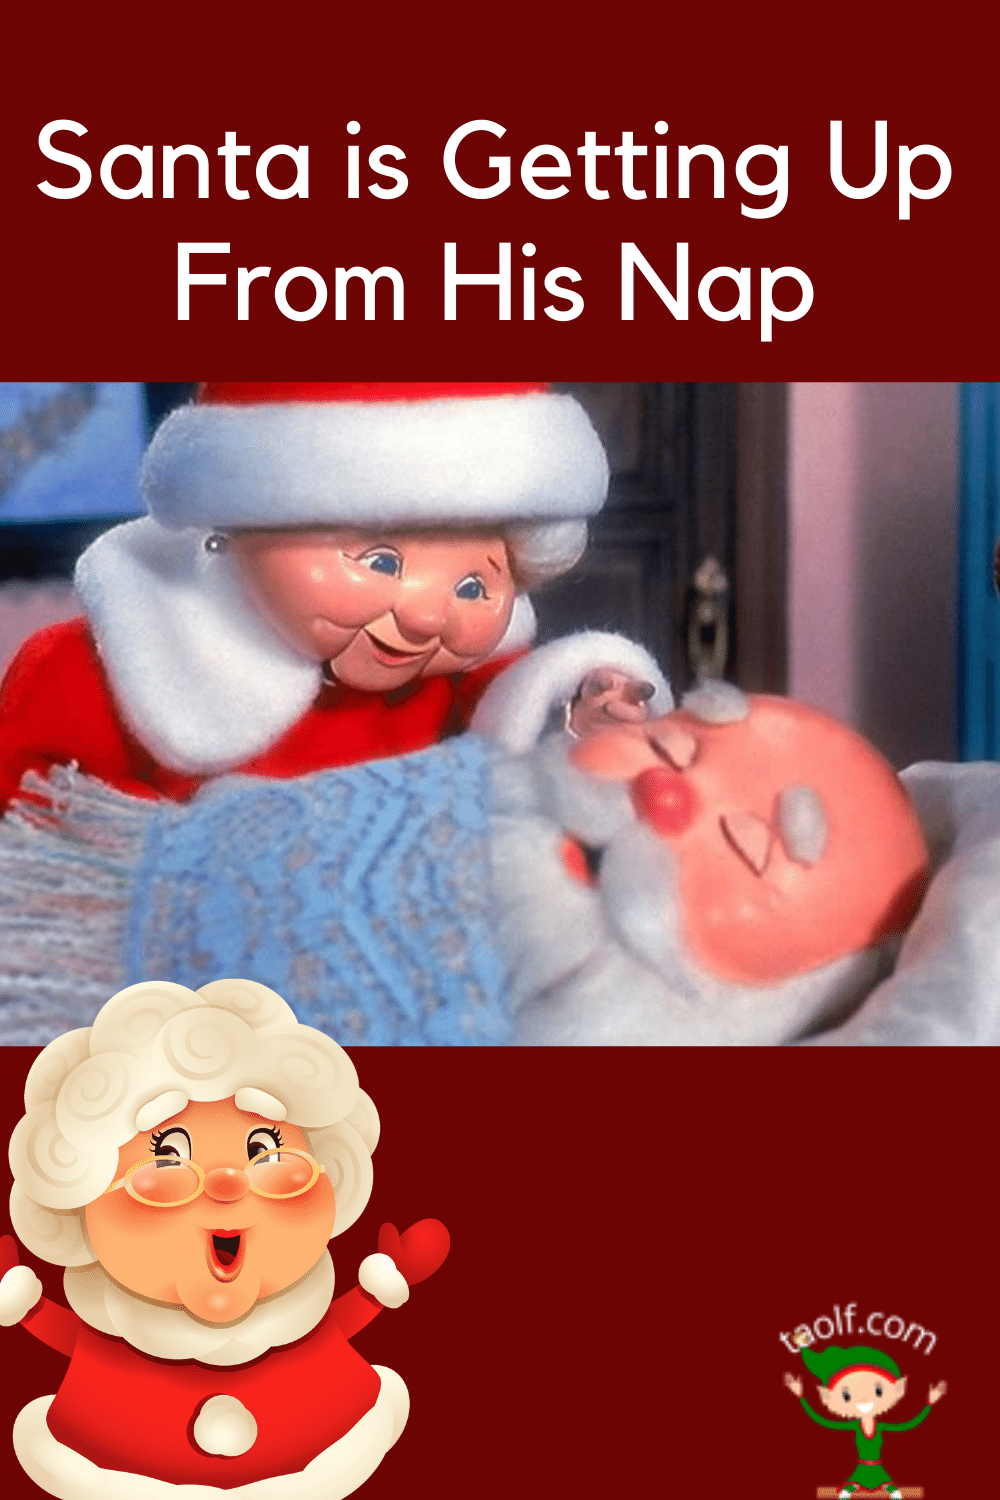 Santa is Getting Up From Nap